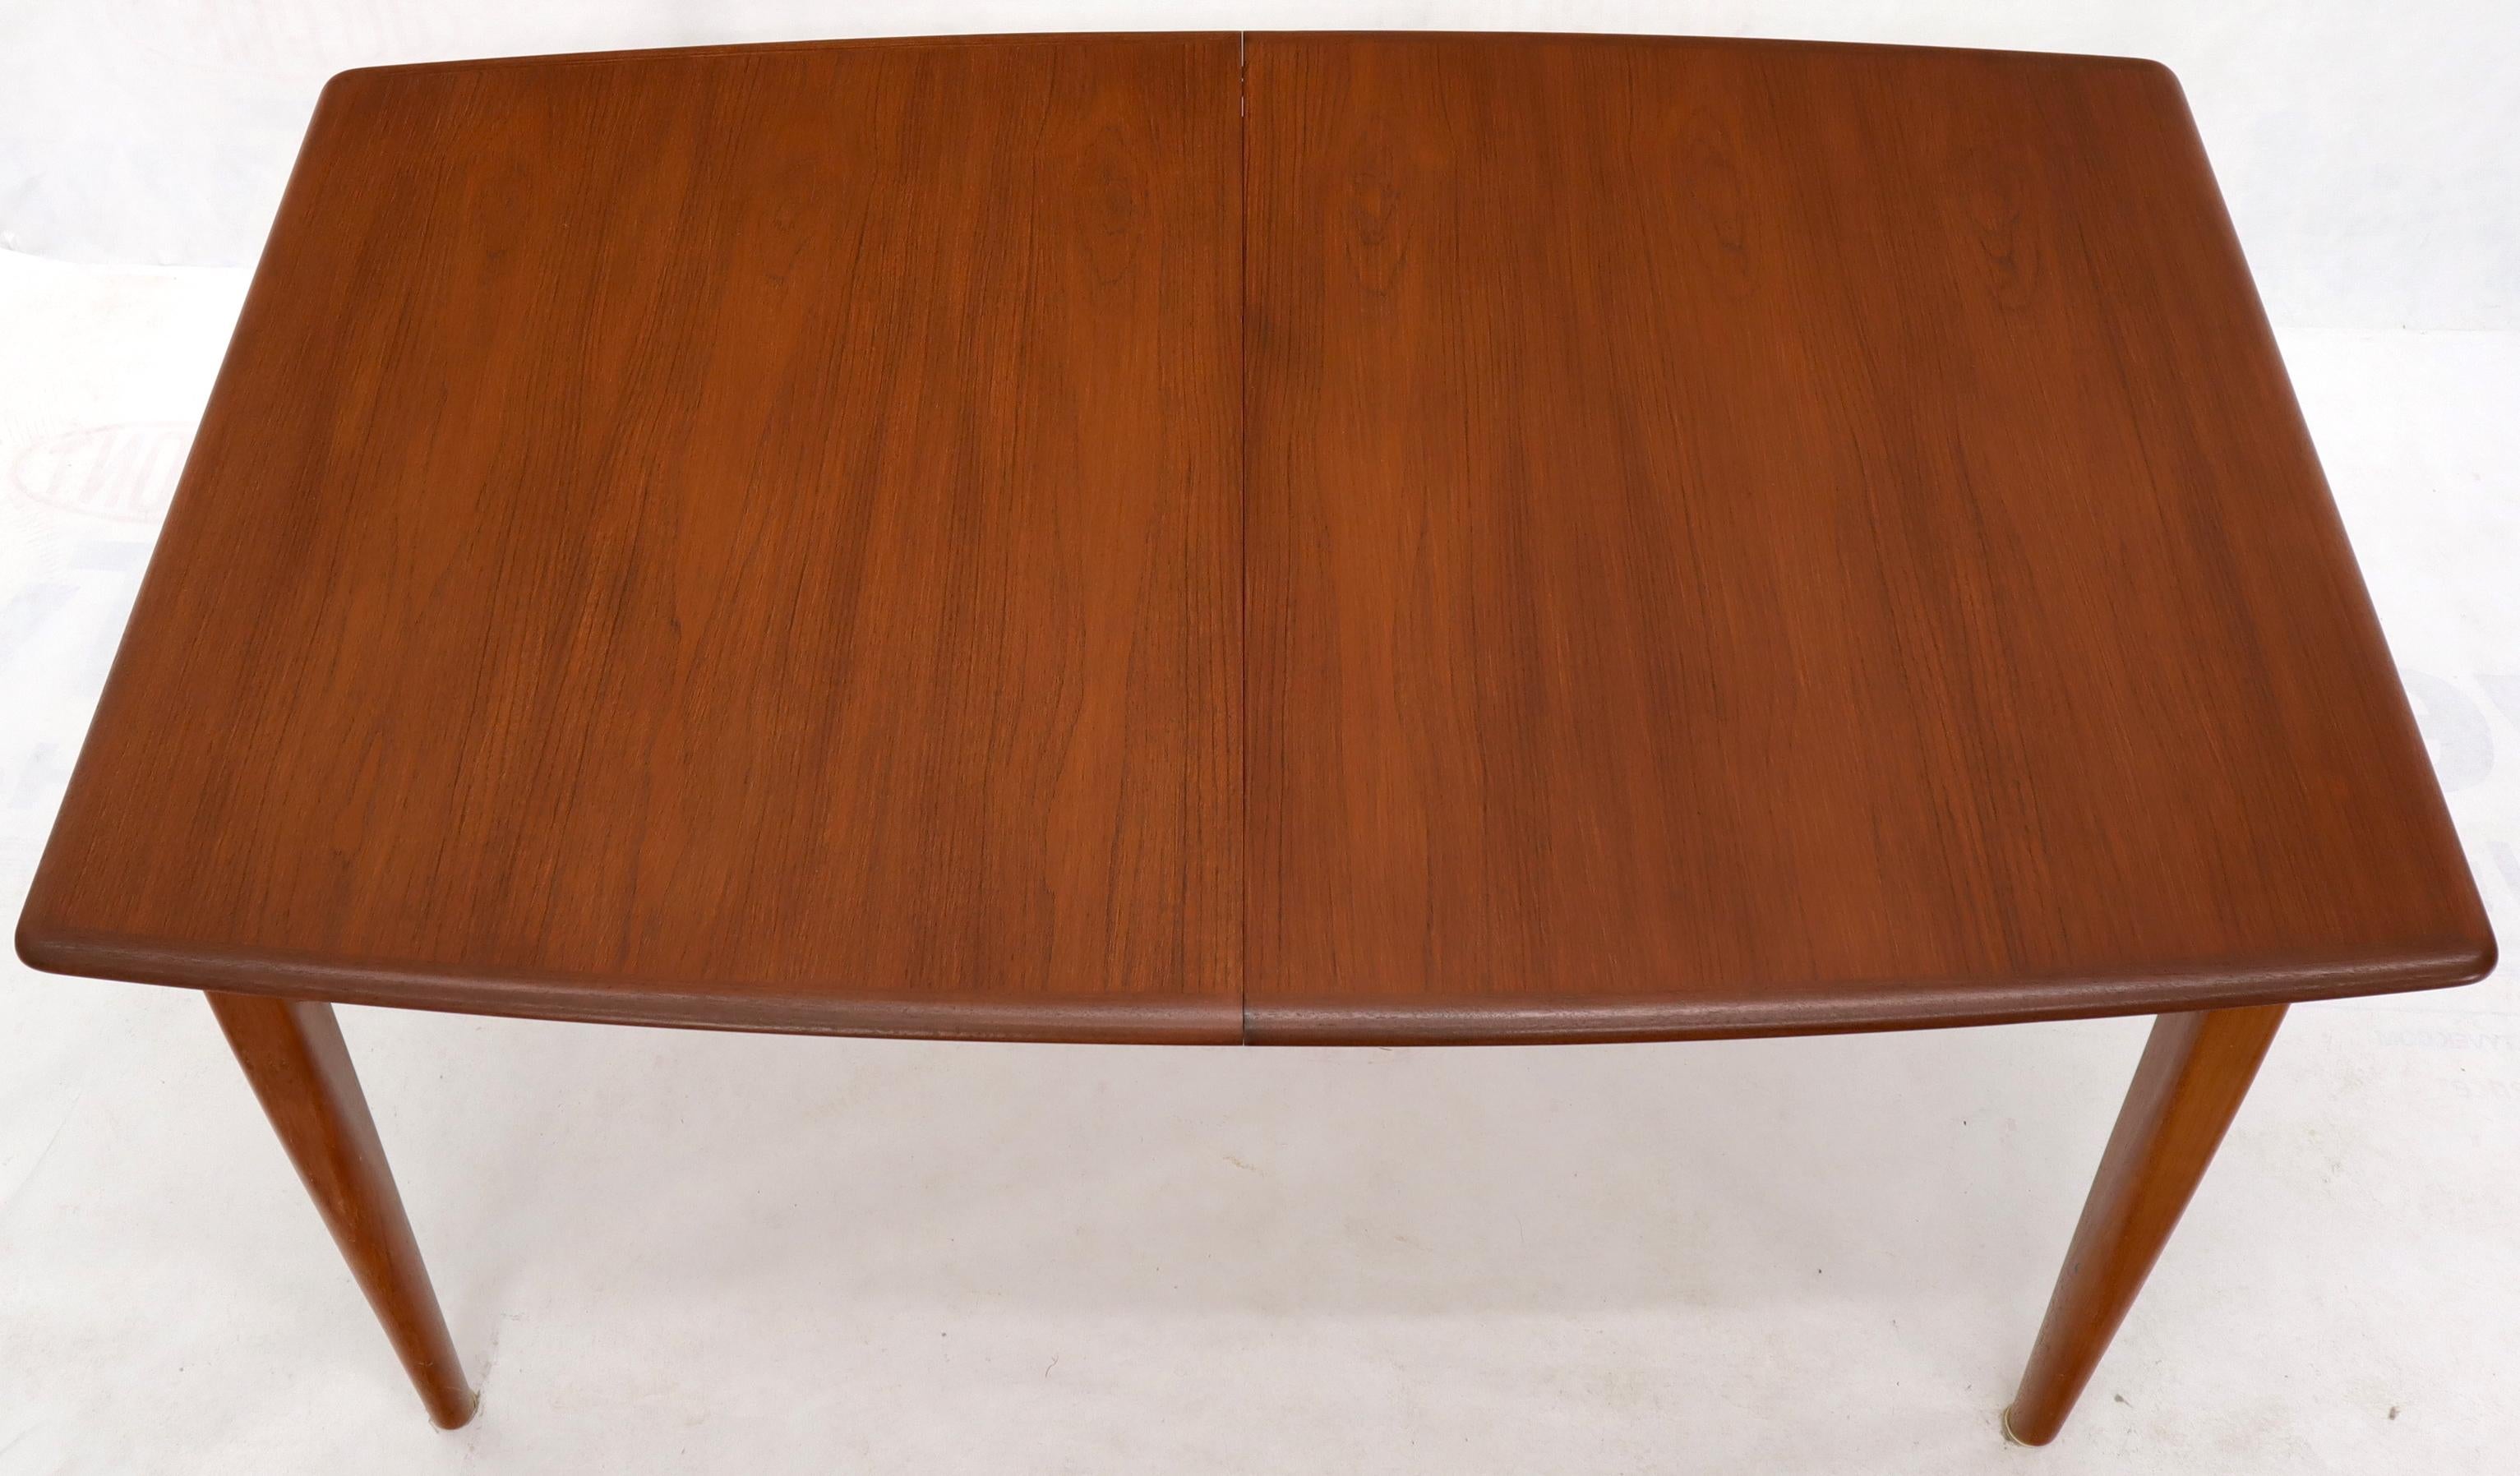 Danish Mid-Century Modern Teak Dining Table with Two Pop Up Self Storing Leaves For Sale 3